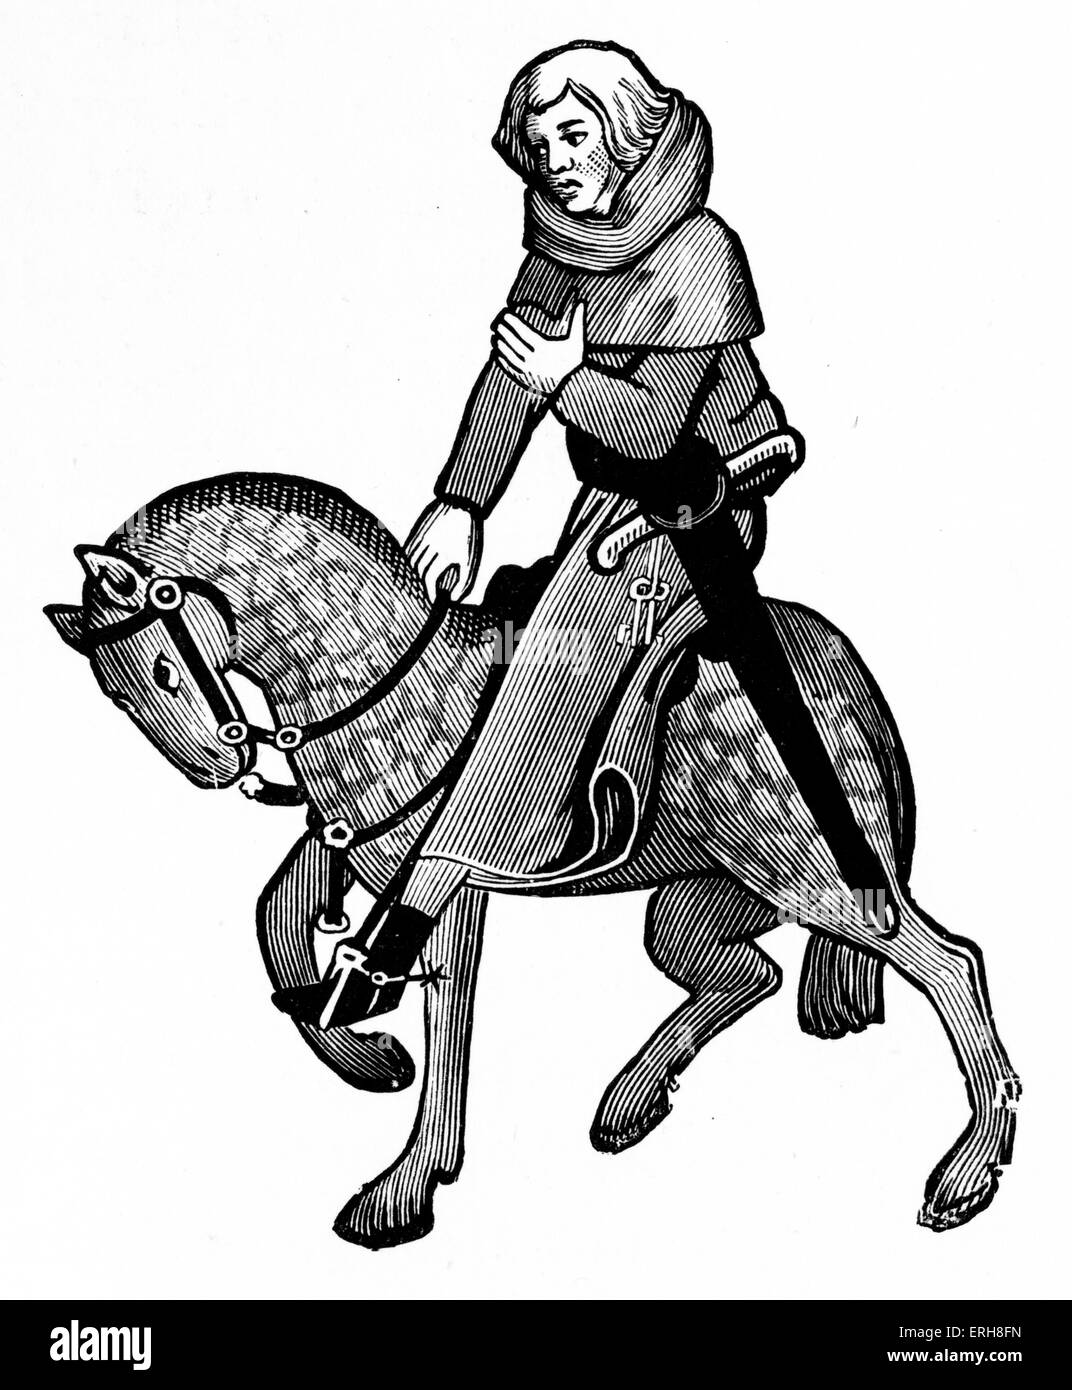 Geoffrey Chaucer ' s Canterbury Tales - The Reeve on horseback. English poet, c. 1343-1400. Ellesemere manuscript of Canterbury Tales. Stock Photo